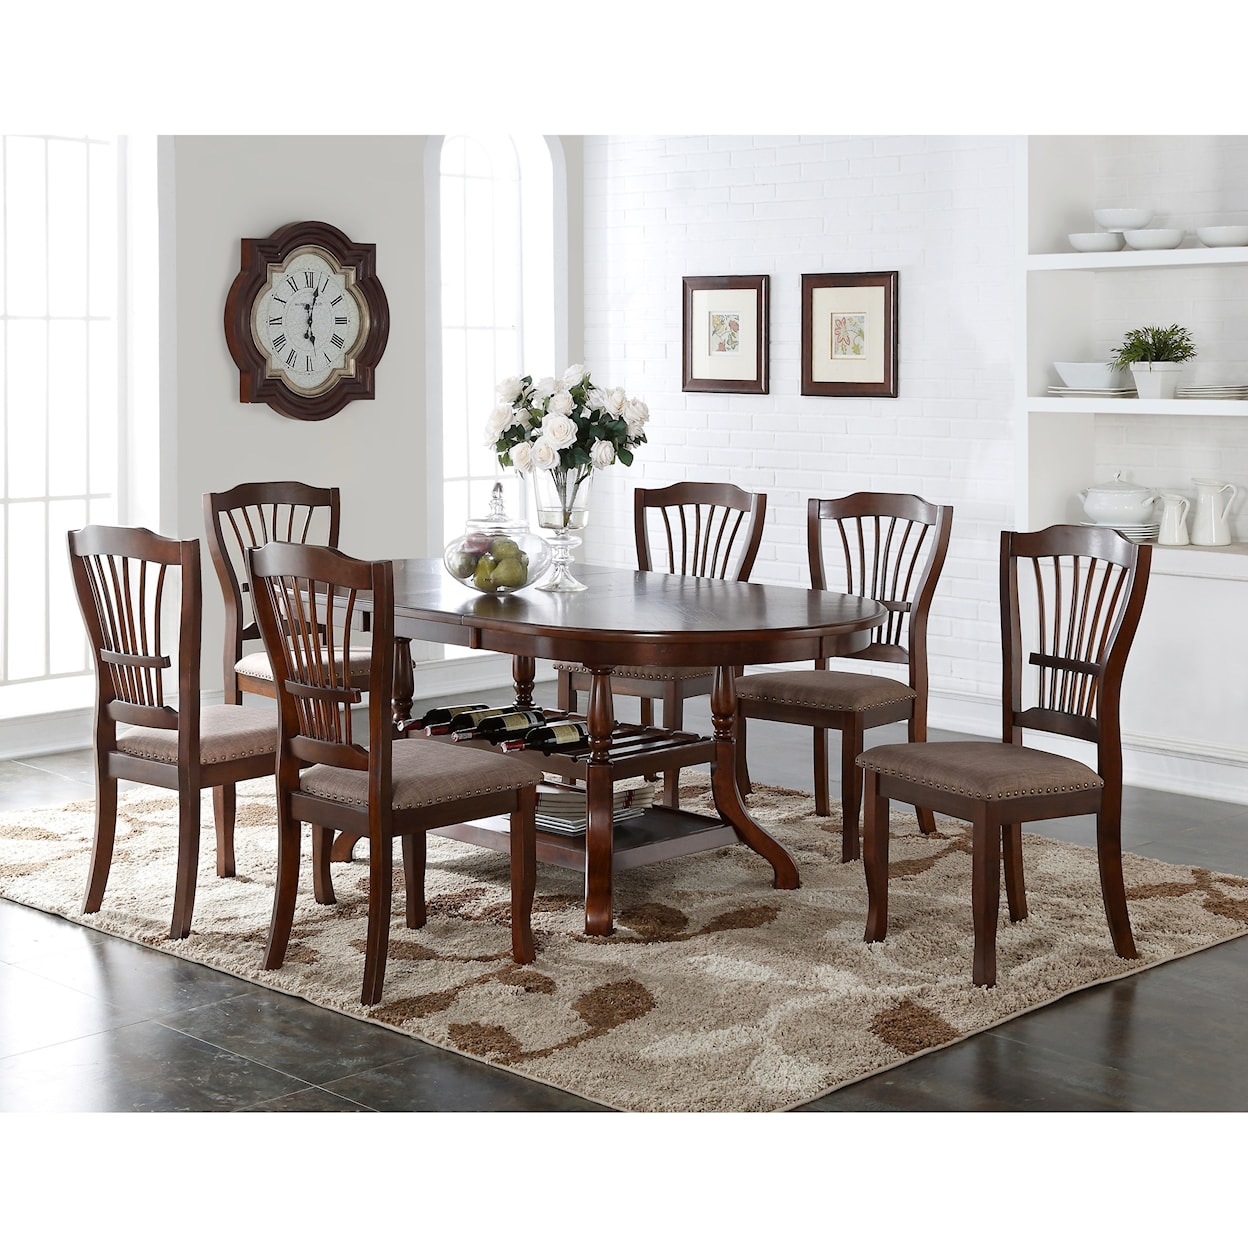 New Classic Bixby 7 Piece Dining Table Set